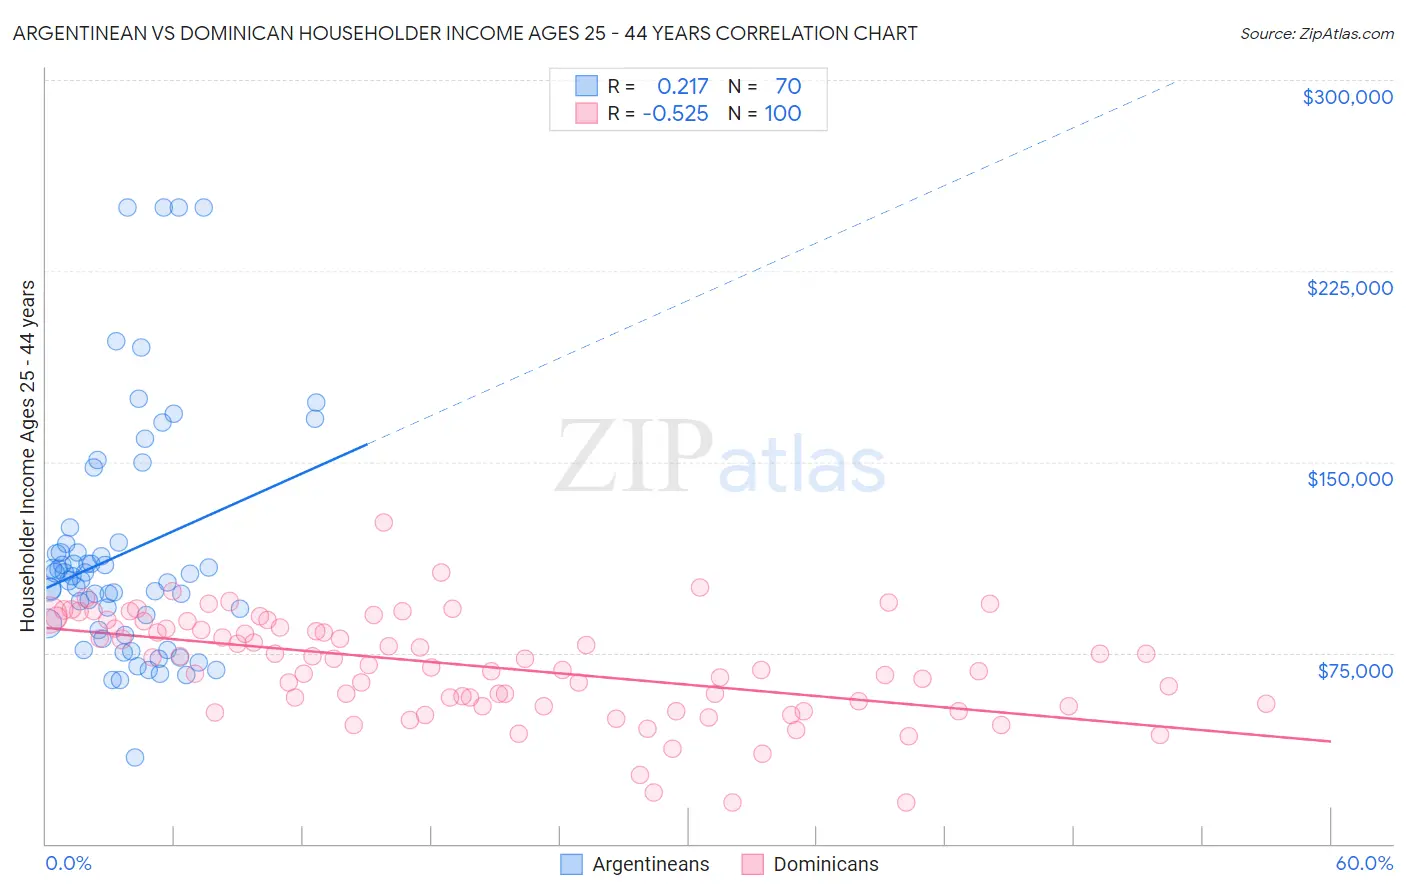 Argentinean vs Dominican Householder Income Ages 25 - 44 years